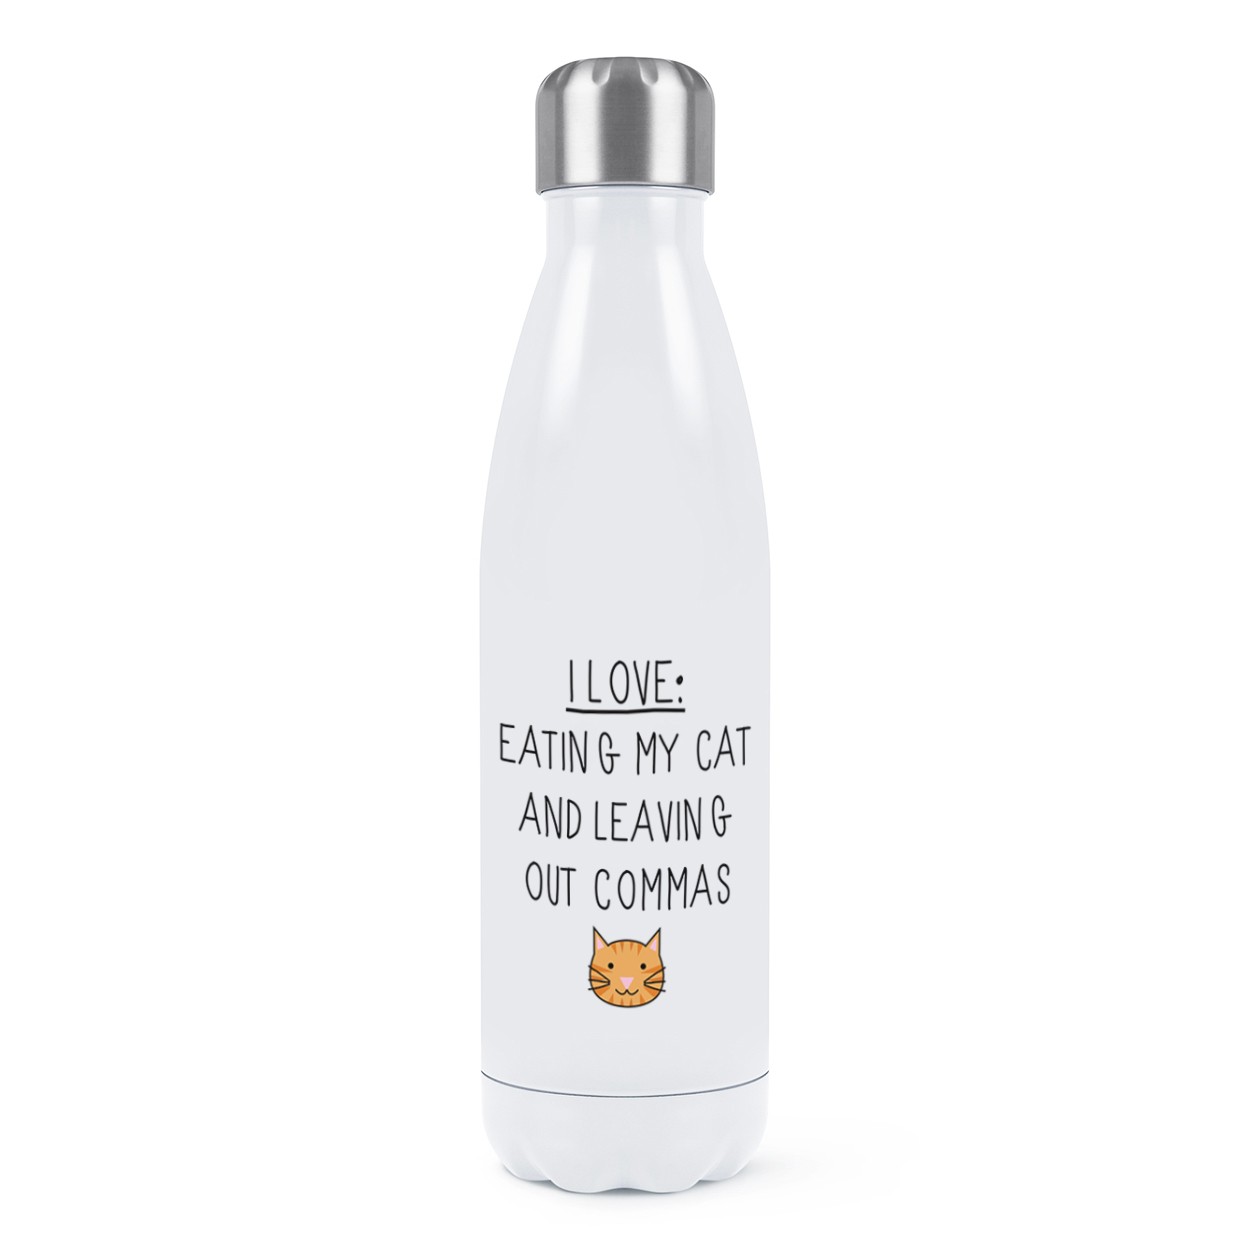 I Love Eating My Cat and Leaving Out Commas Double Wall Water Bottle